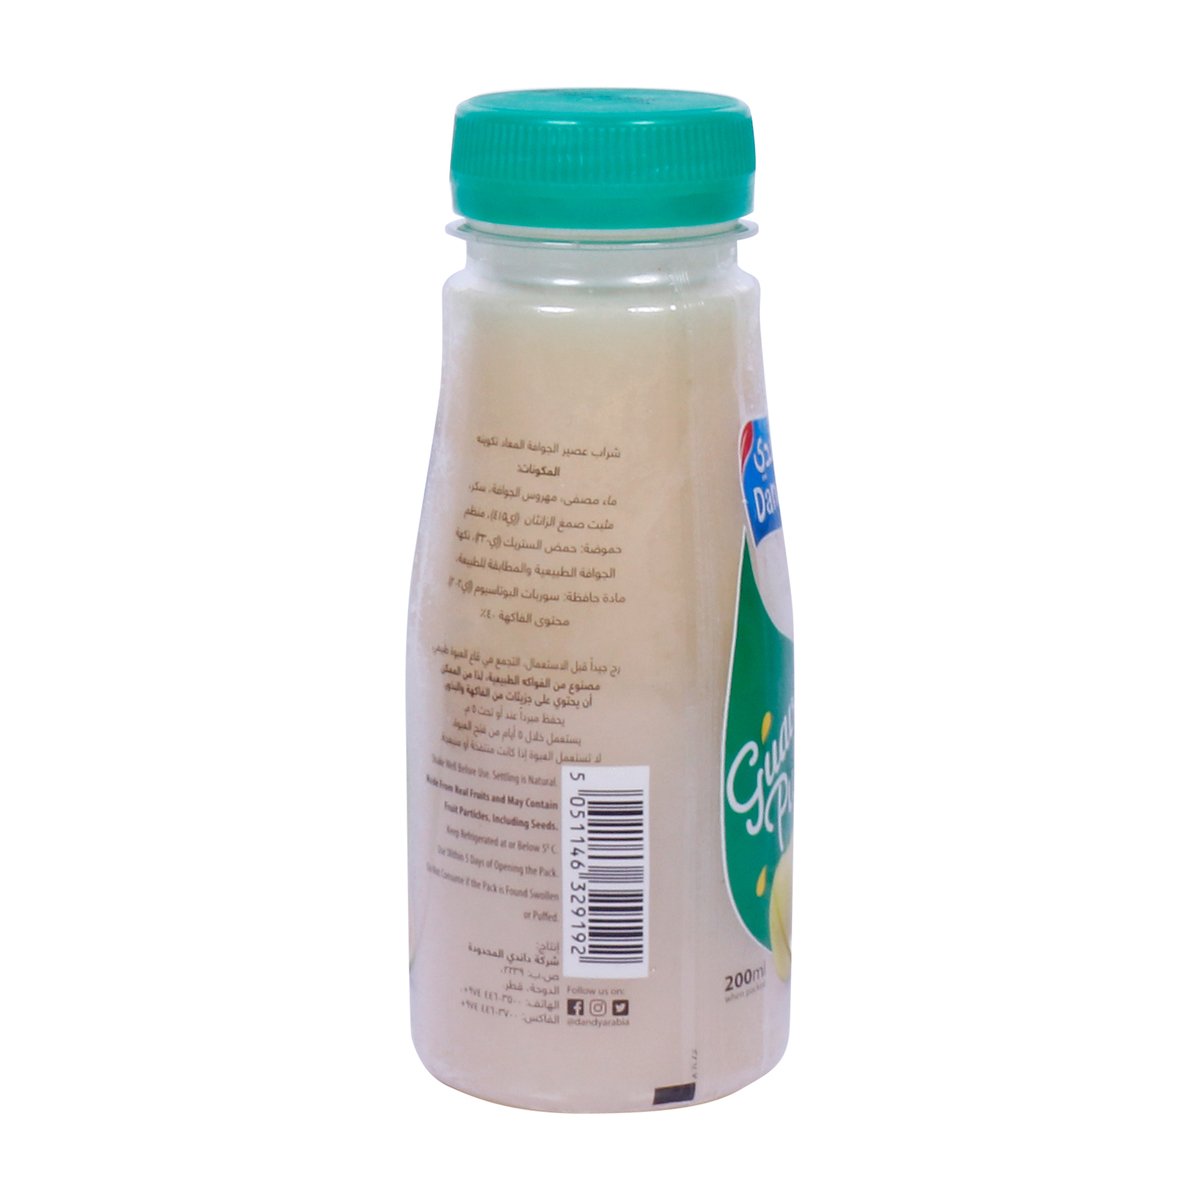 Dandy Guava Juice with Pulp 200ml